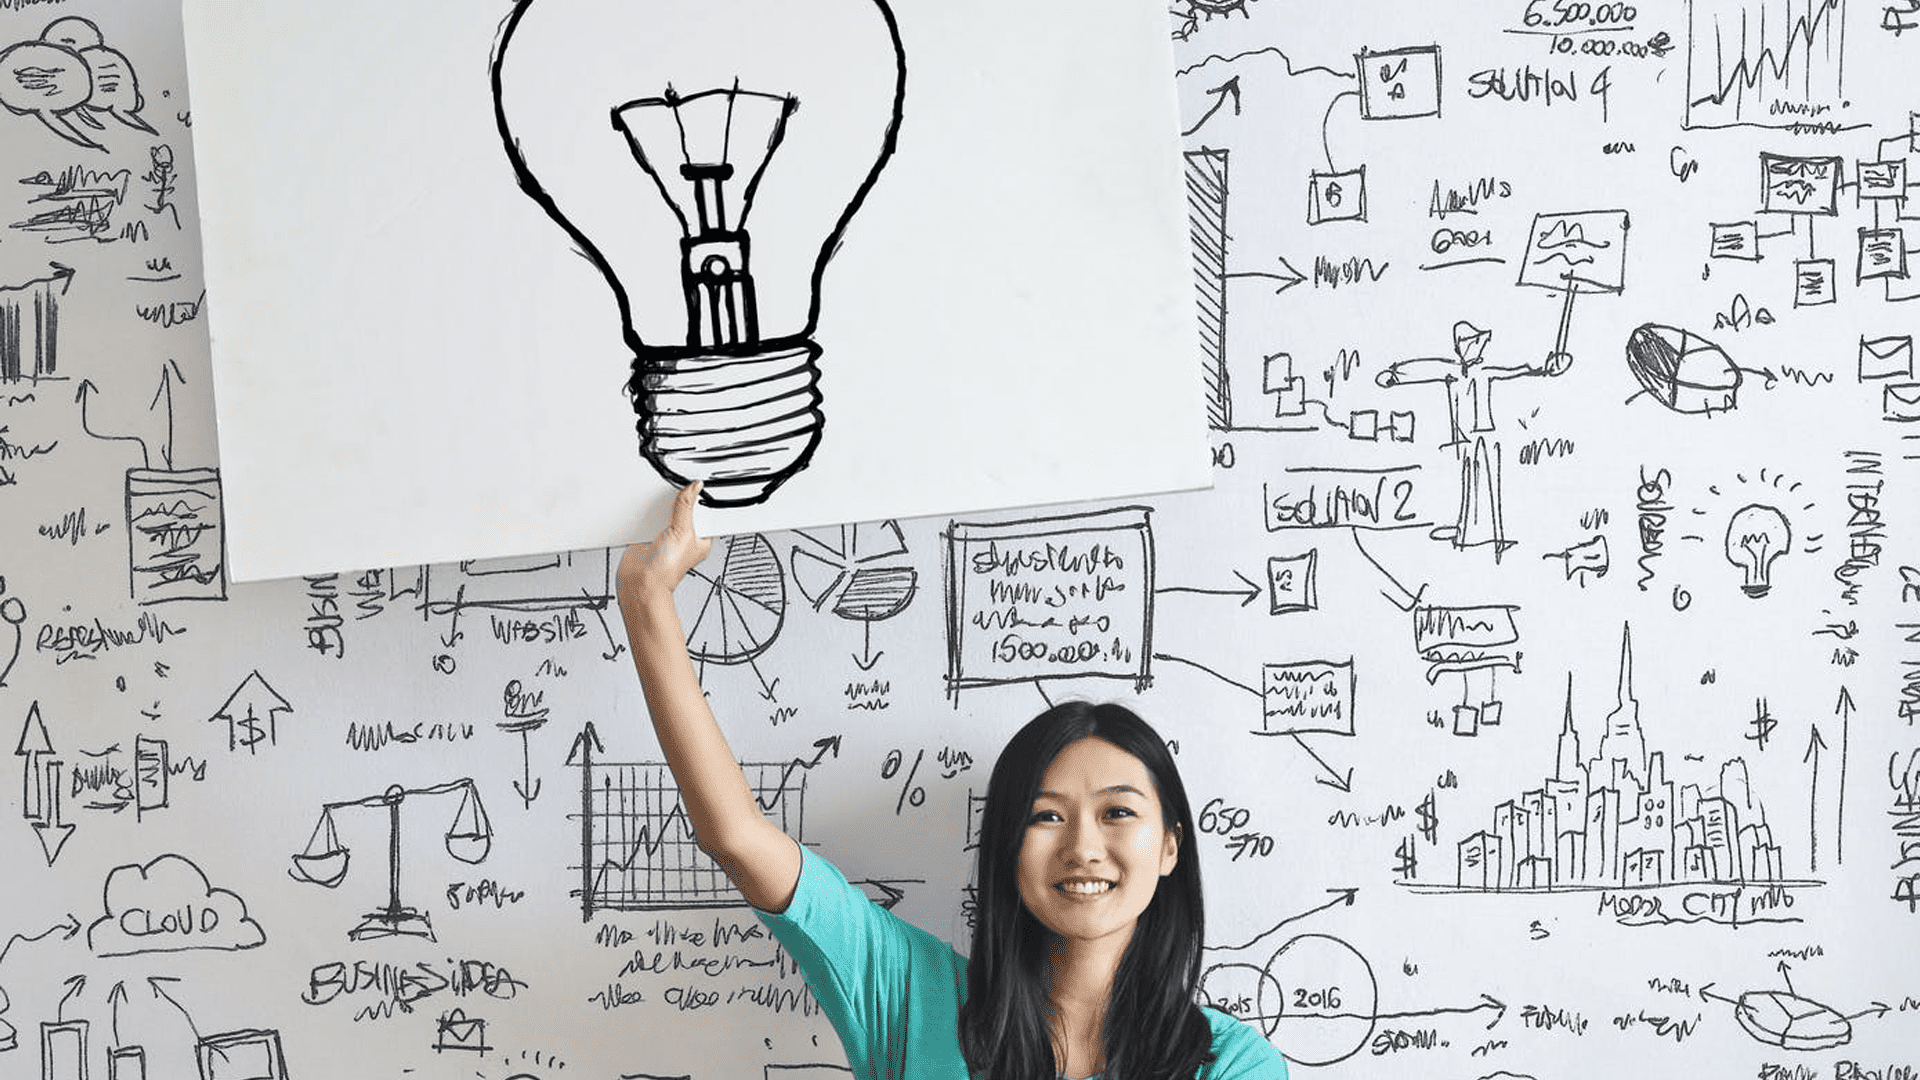 stock image showing a woman holding a lightbulb illustration with a bunch of components of why a good marketing strategy takes time behind her on a white board